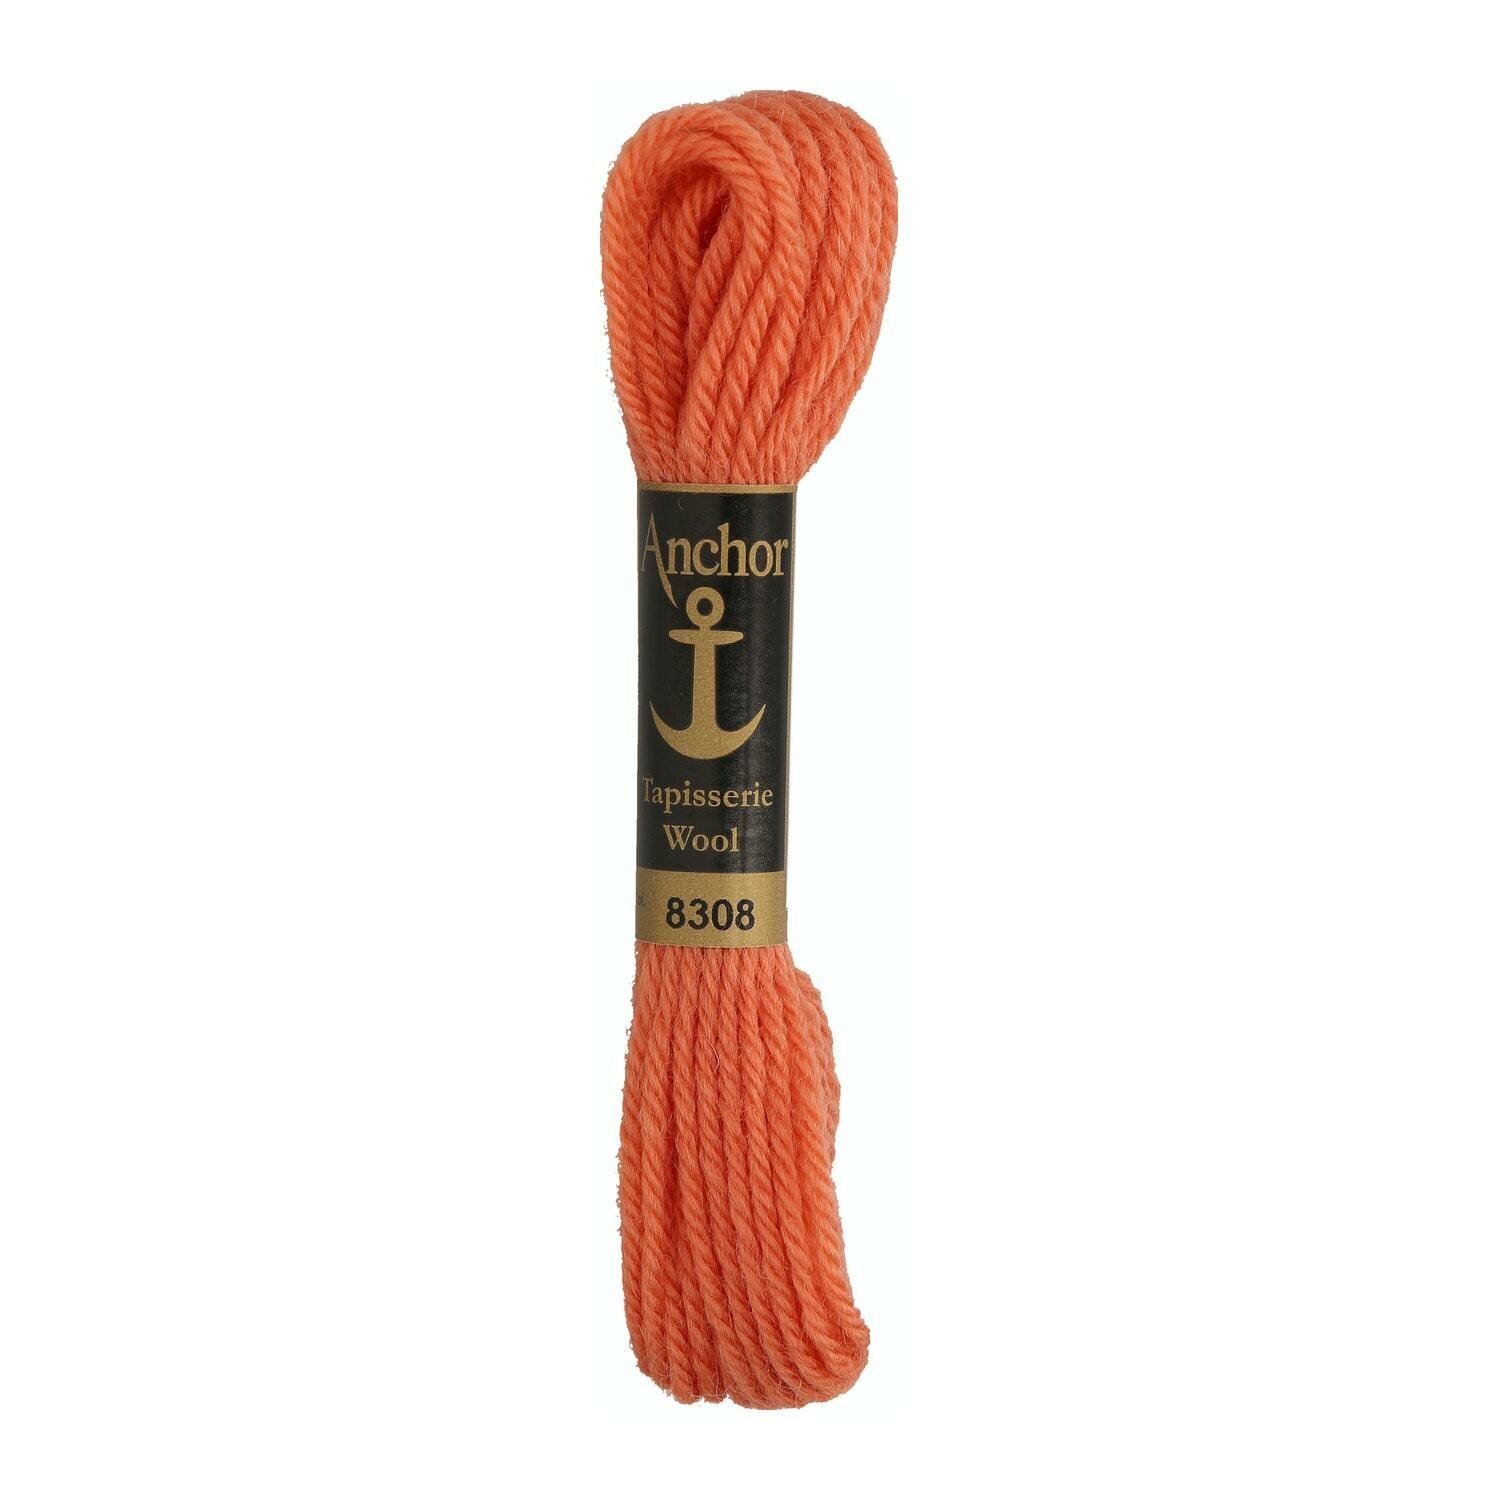 Anchor Tapisserie Wool # 08308